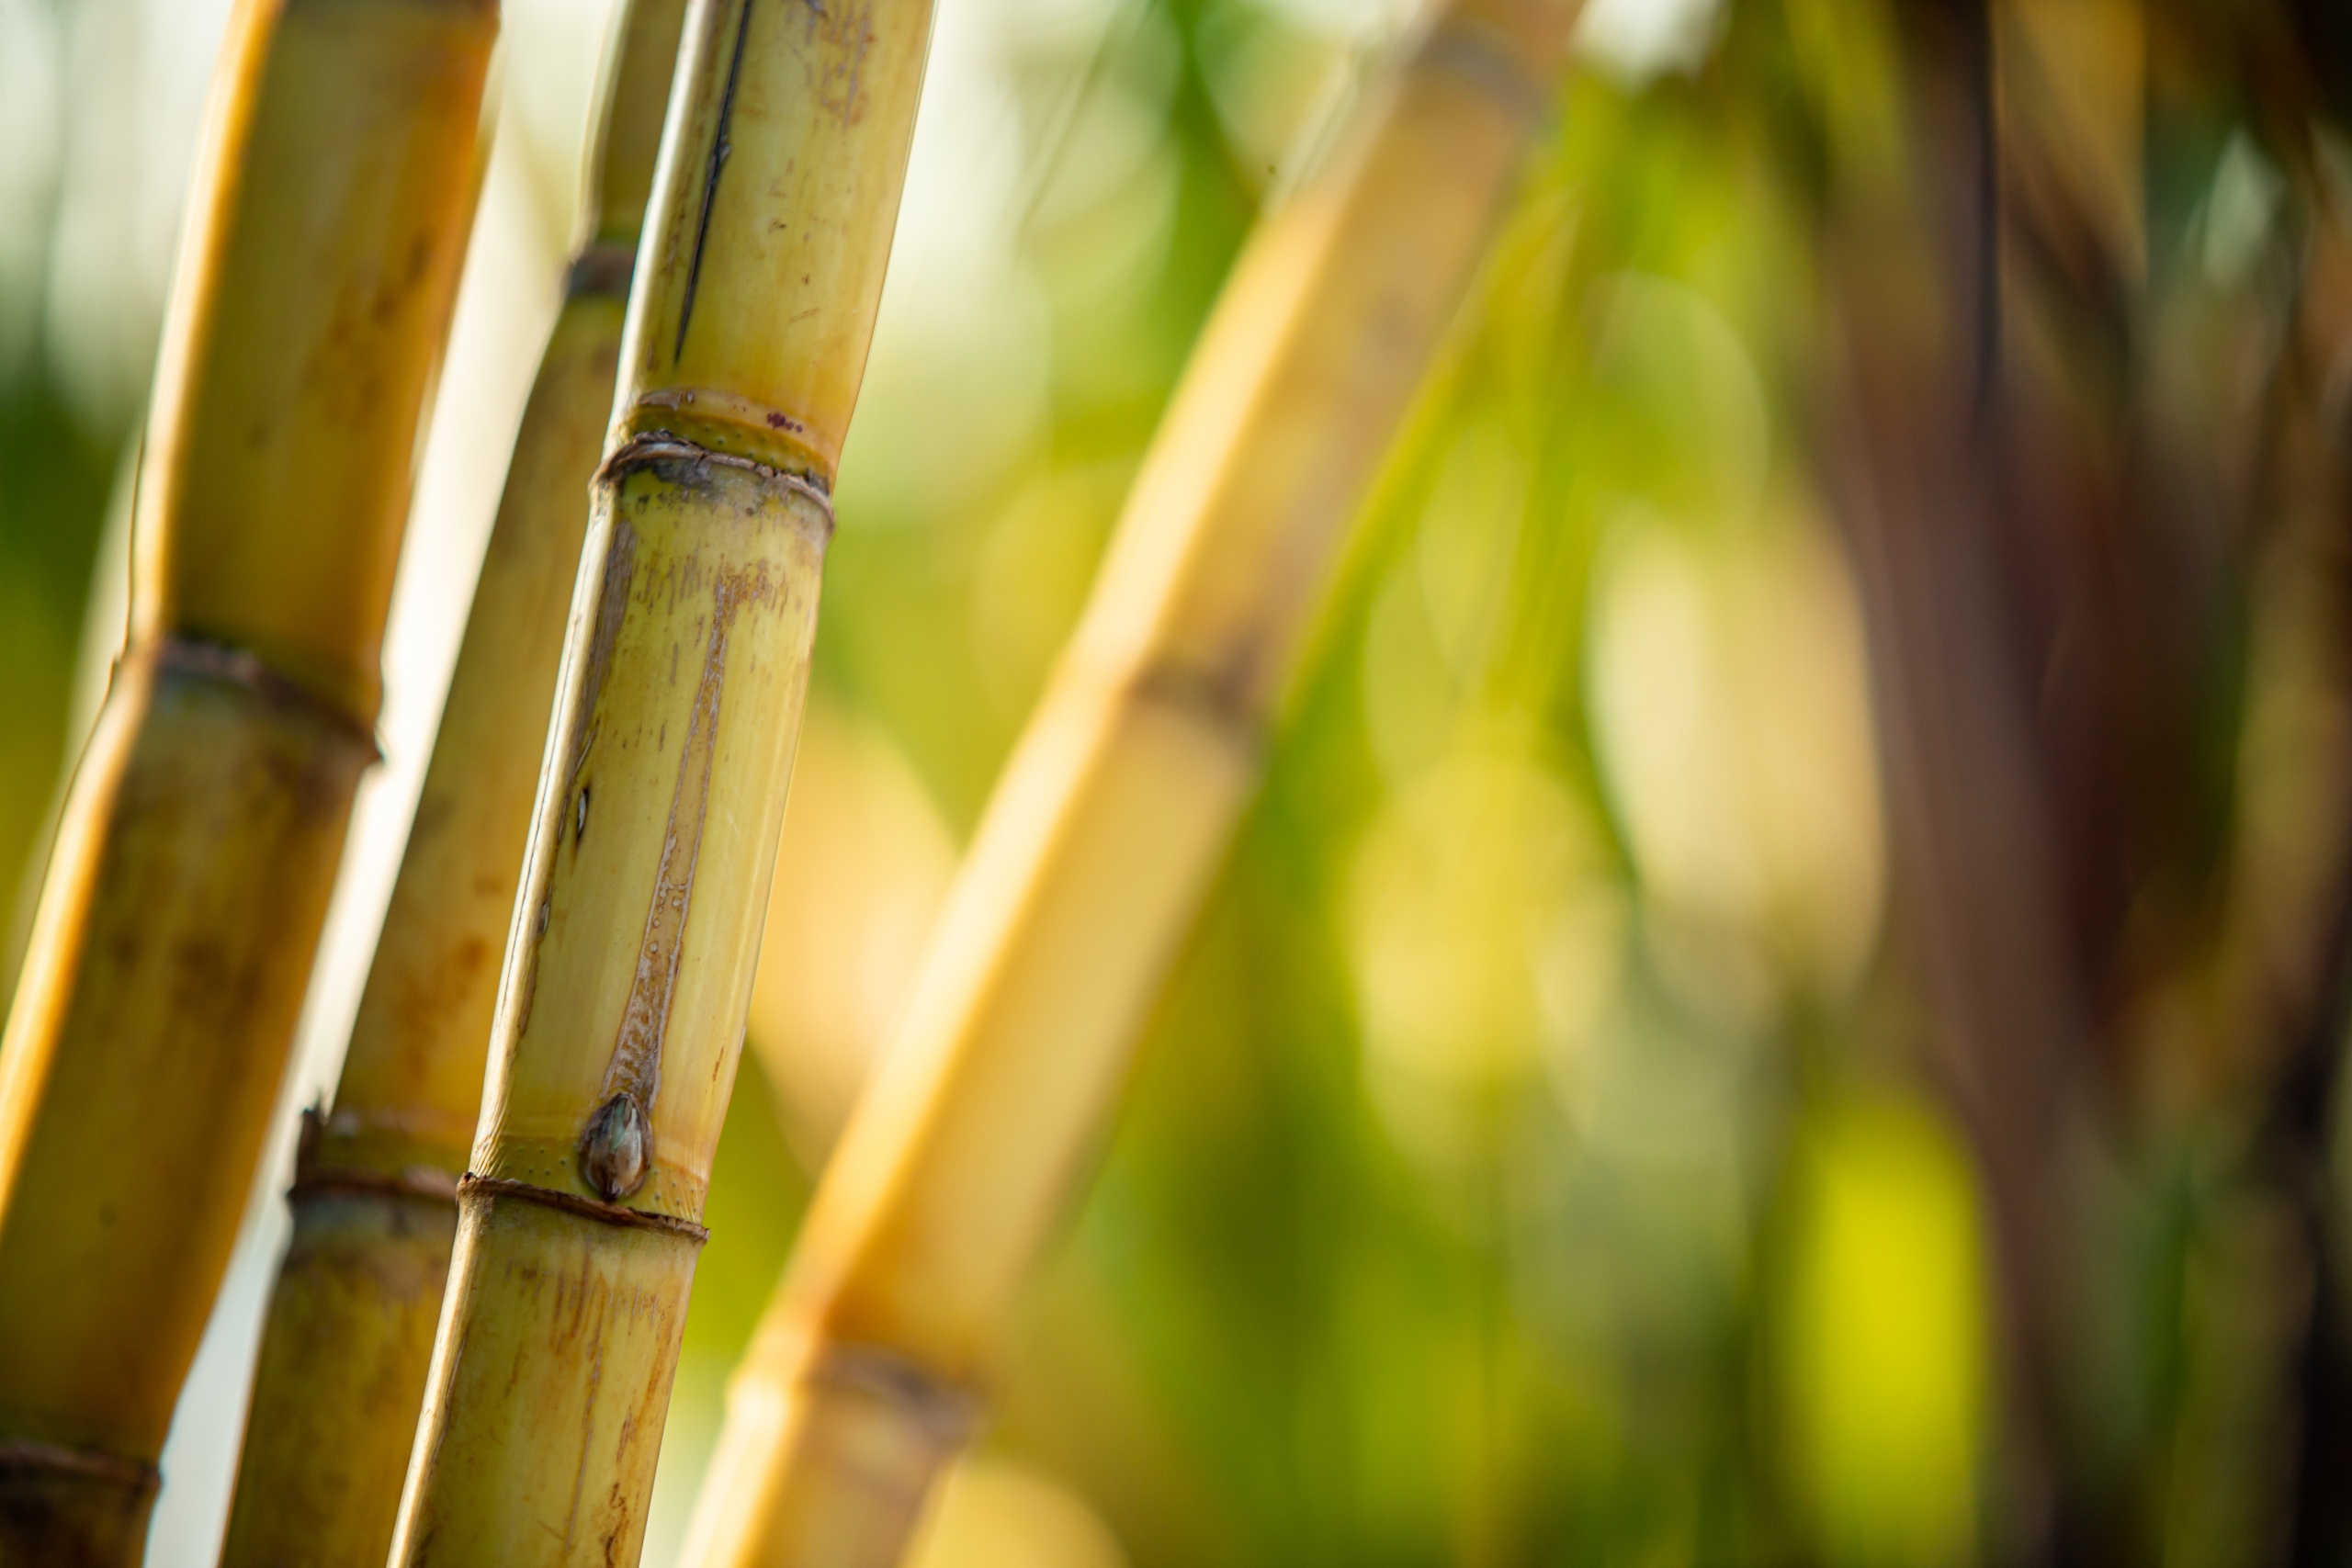 Sugarcane harvest for the second half of march 2021